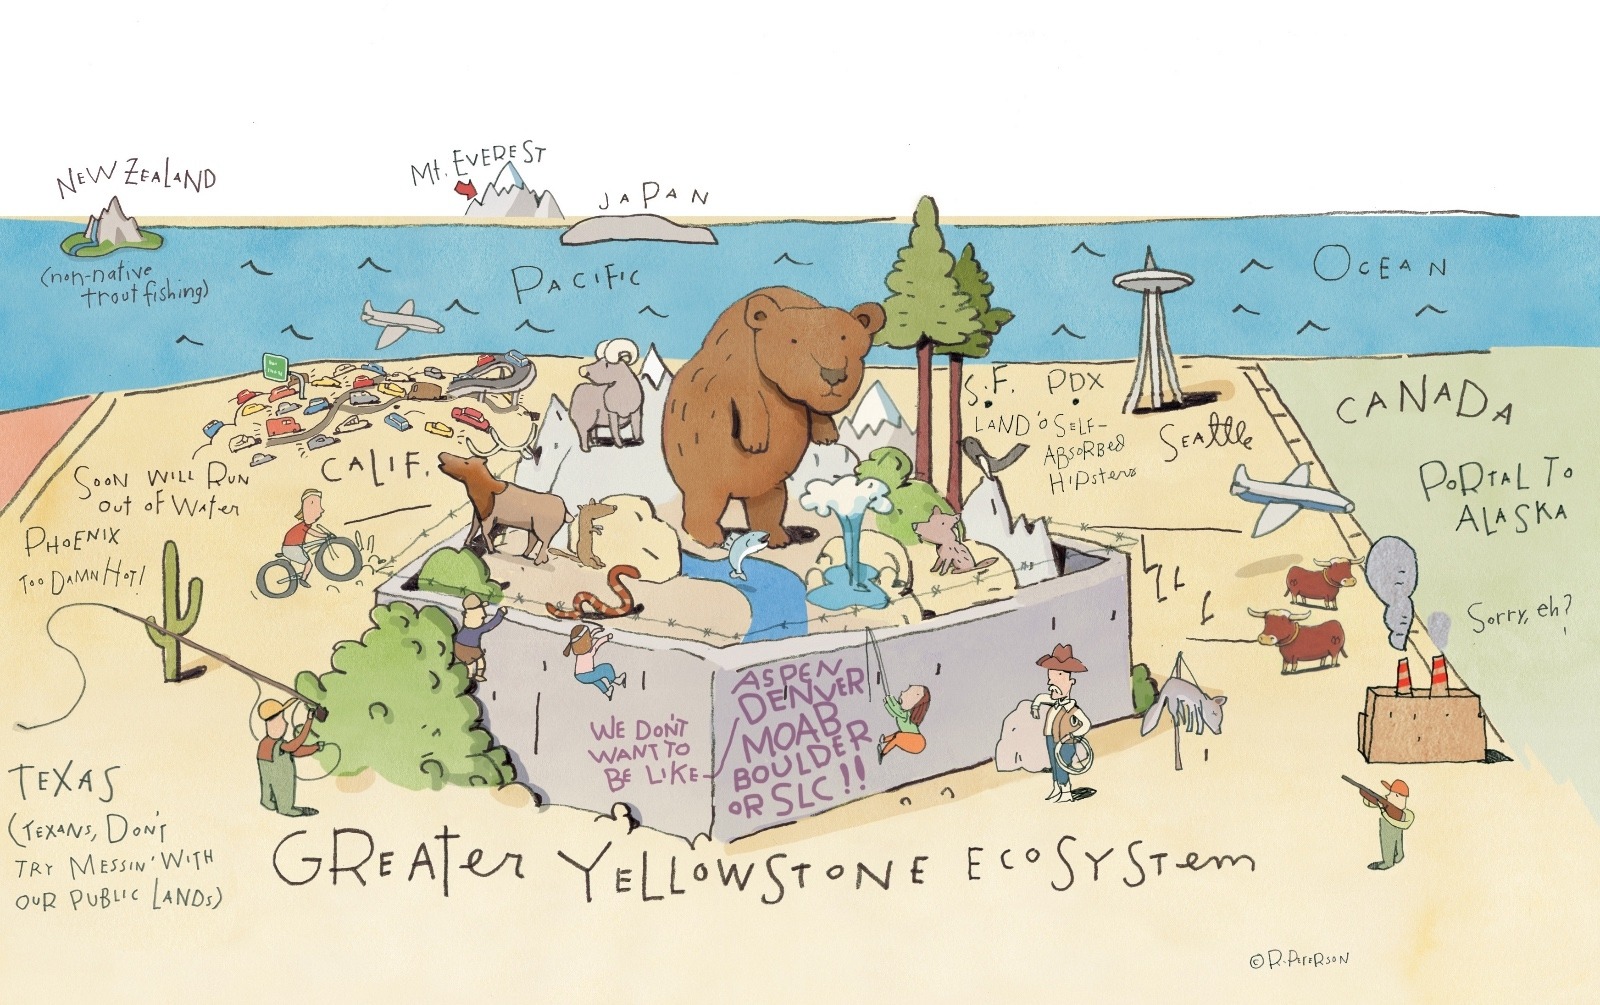 Looking westward toward the Pacific Ocean, illustrator Rick Peterson offers the view from Greater Yellowstone. Click on image to make it larger.